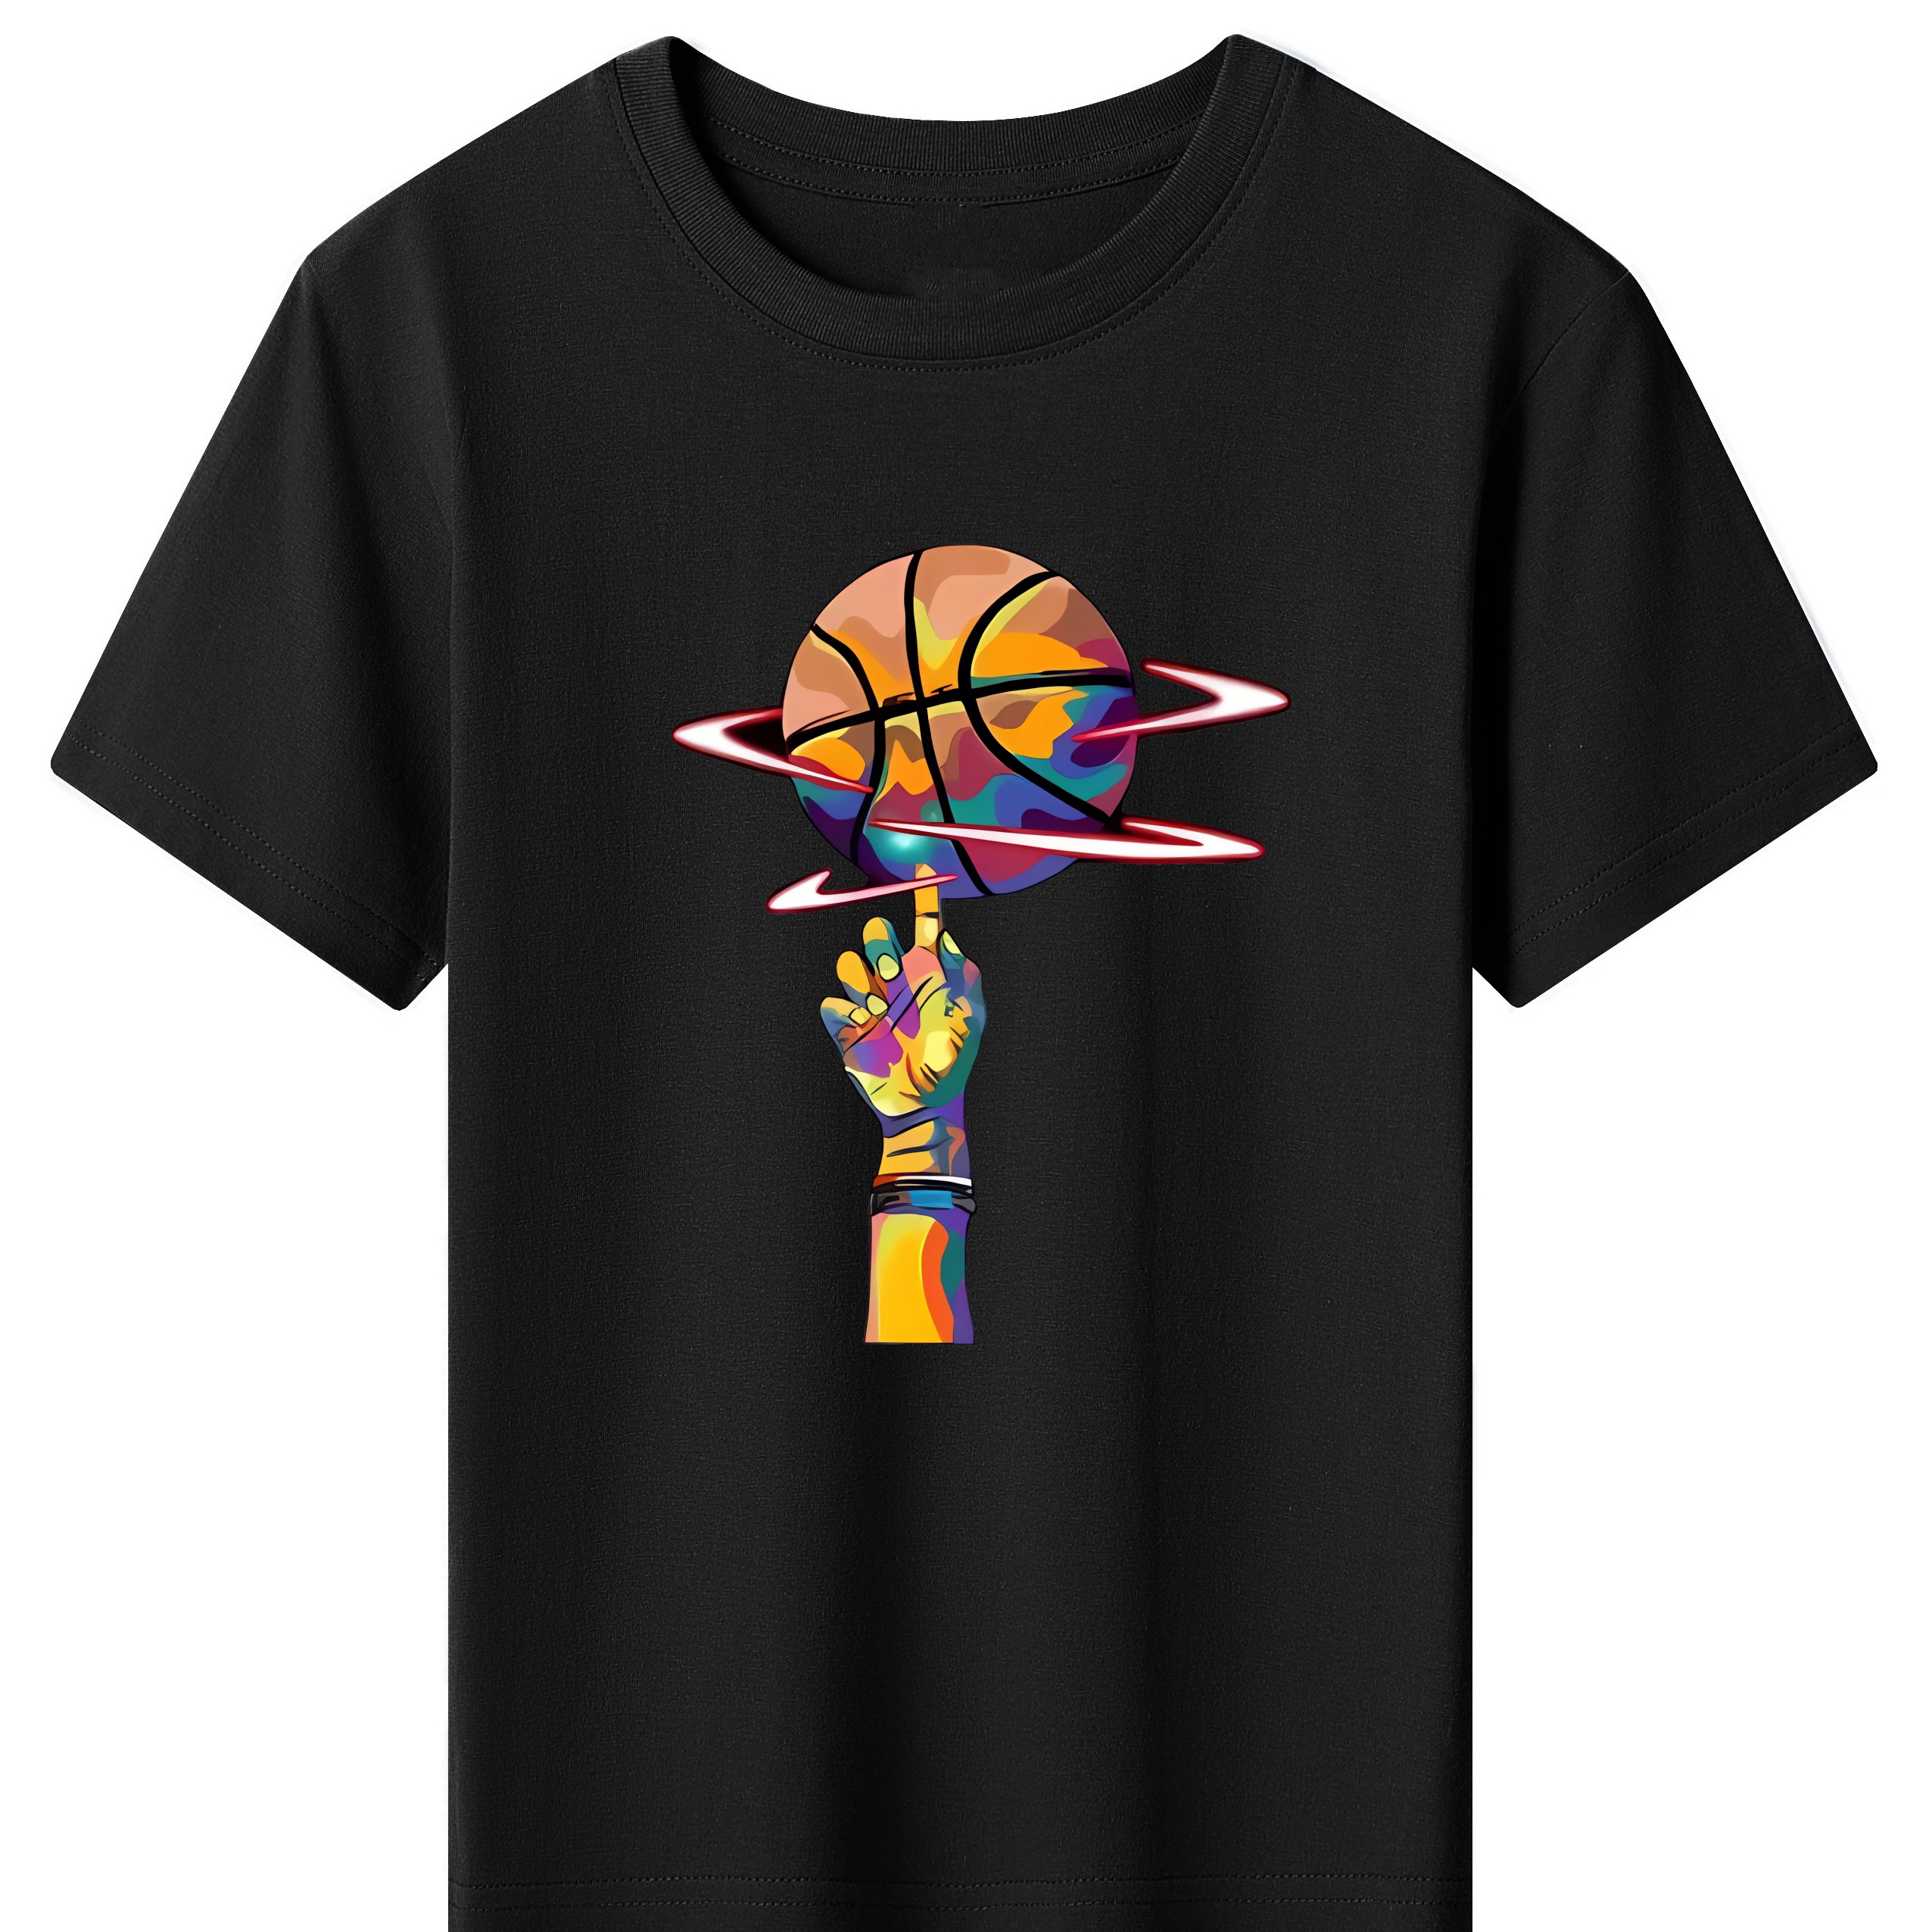 

Finger With Basketball Graphic Print, Boys' Casual & Comfy Short Sleeve Crew Neck Cotton Tee For Spring & Summer, Boys' Clothes